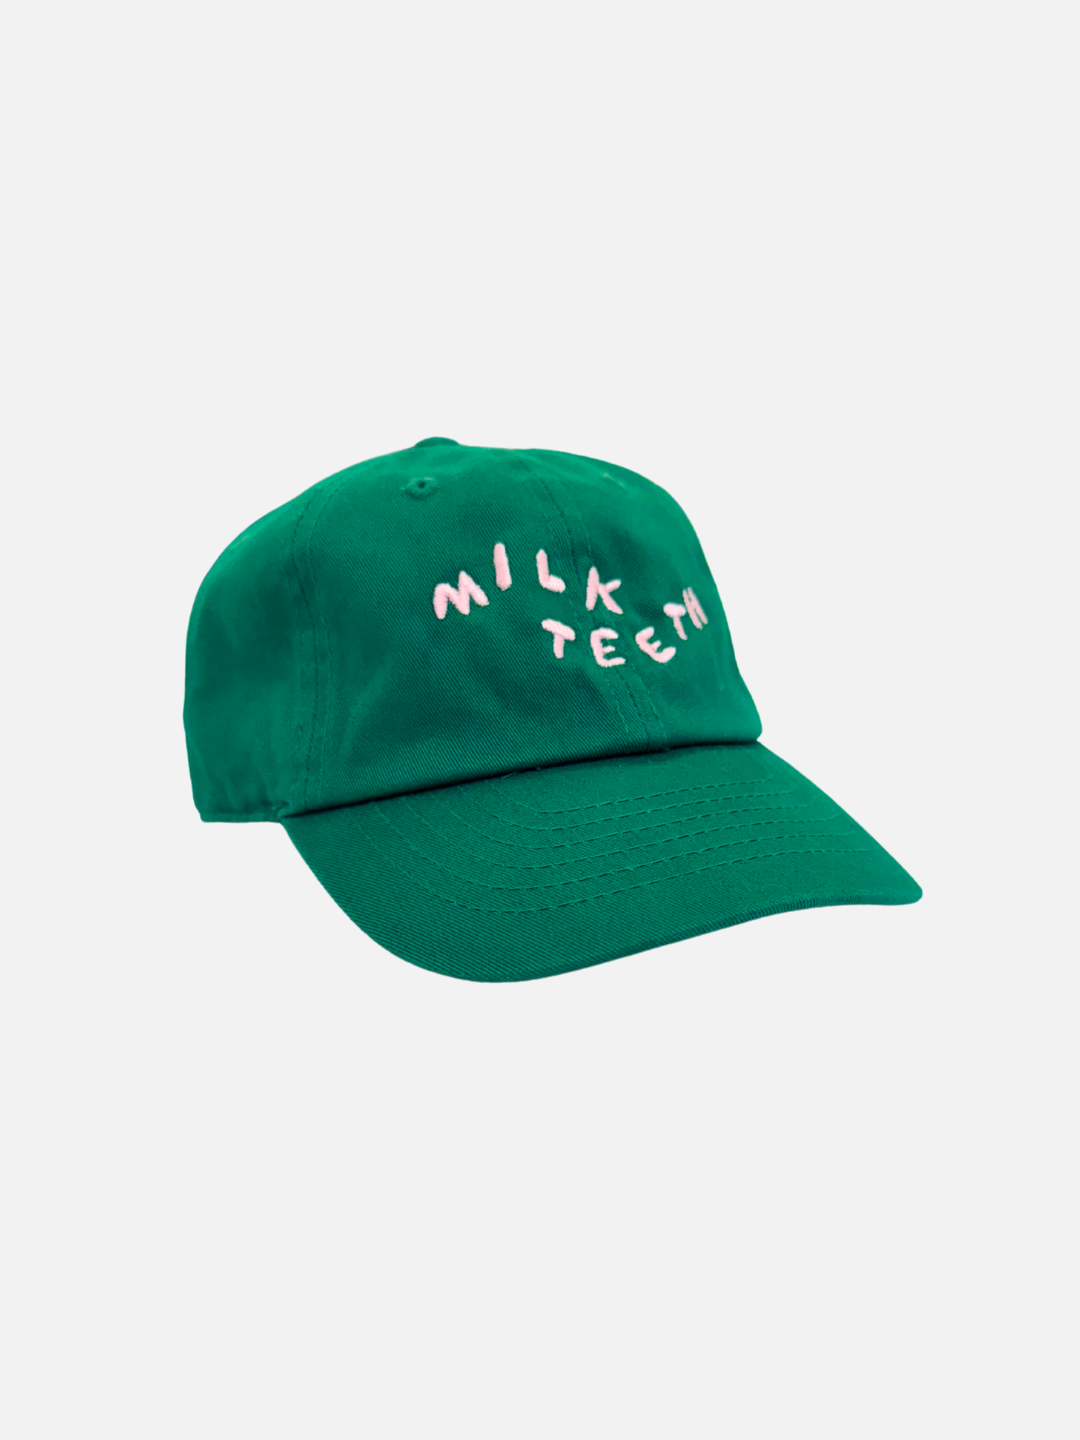 Kelly Green | A front view of the Milk Teeth Cap with pink embroidery